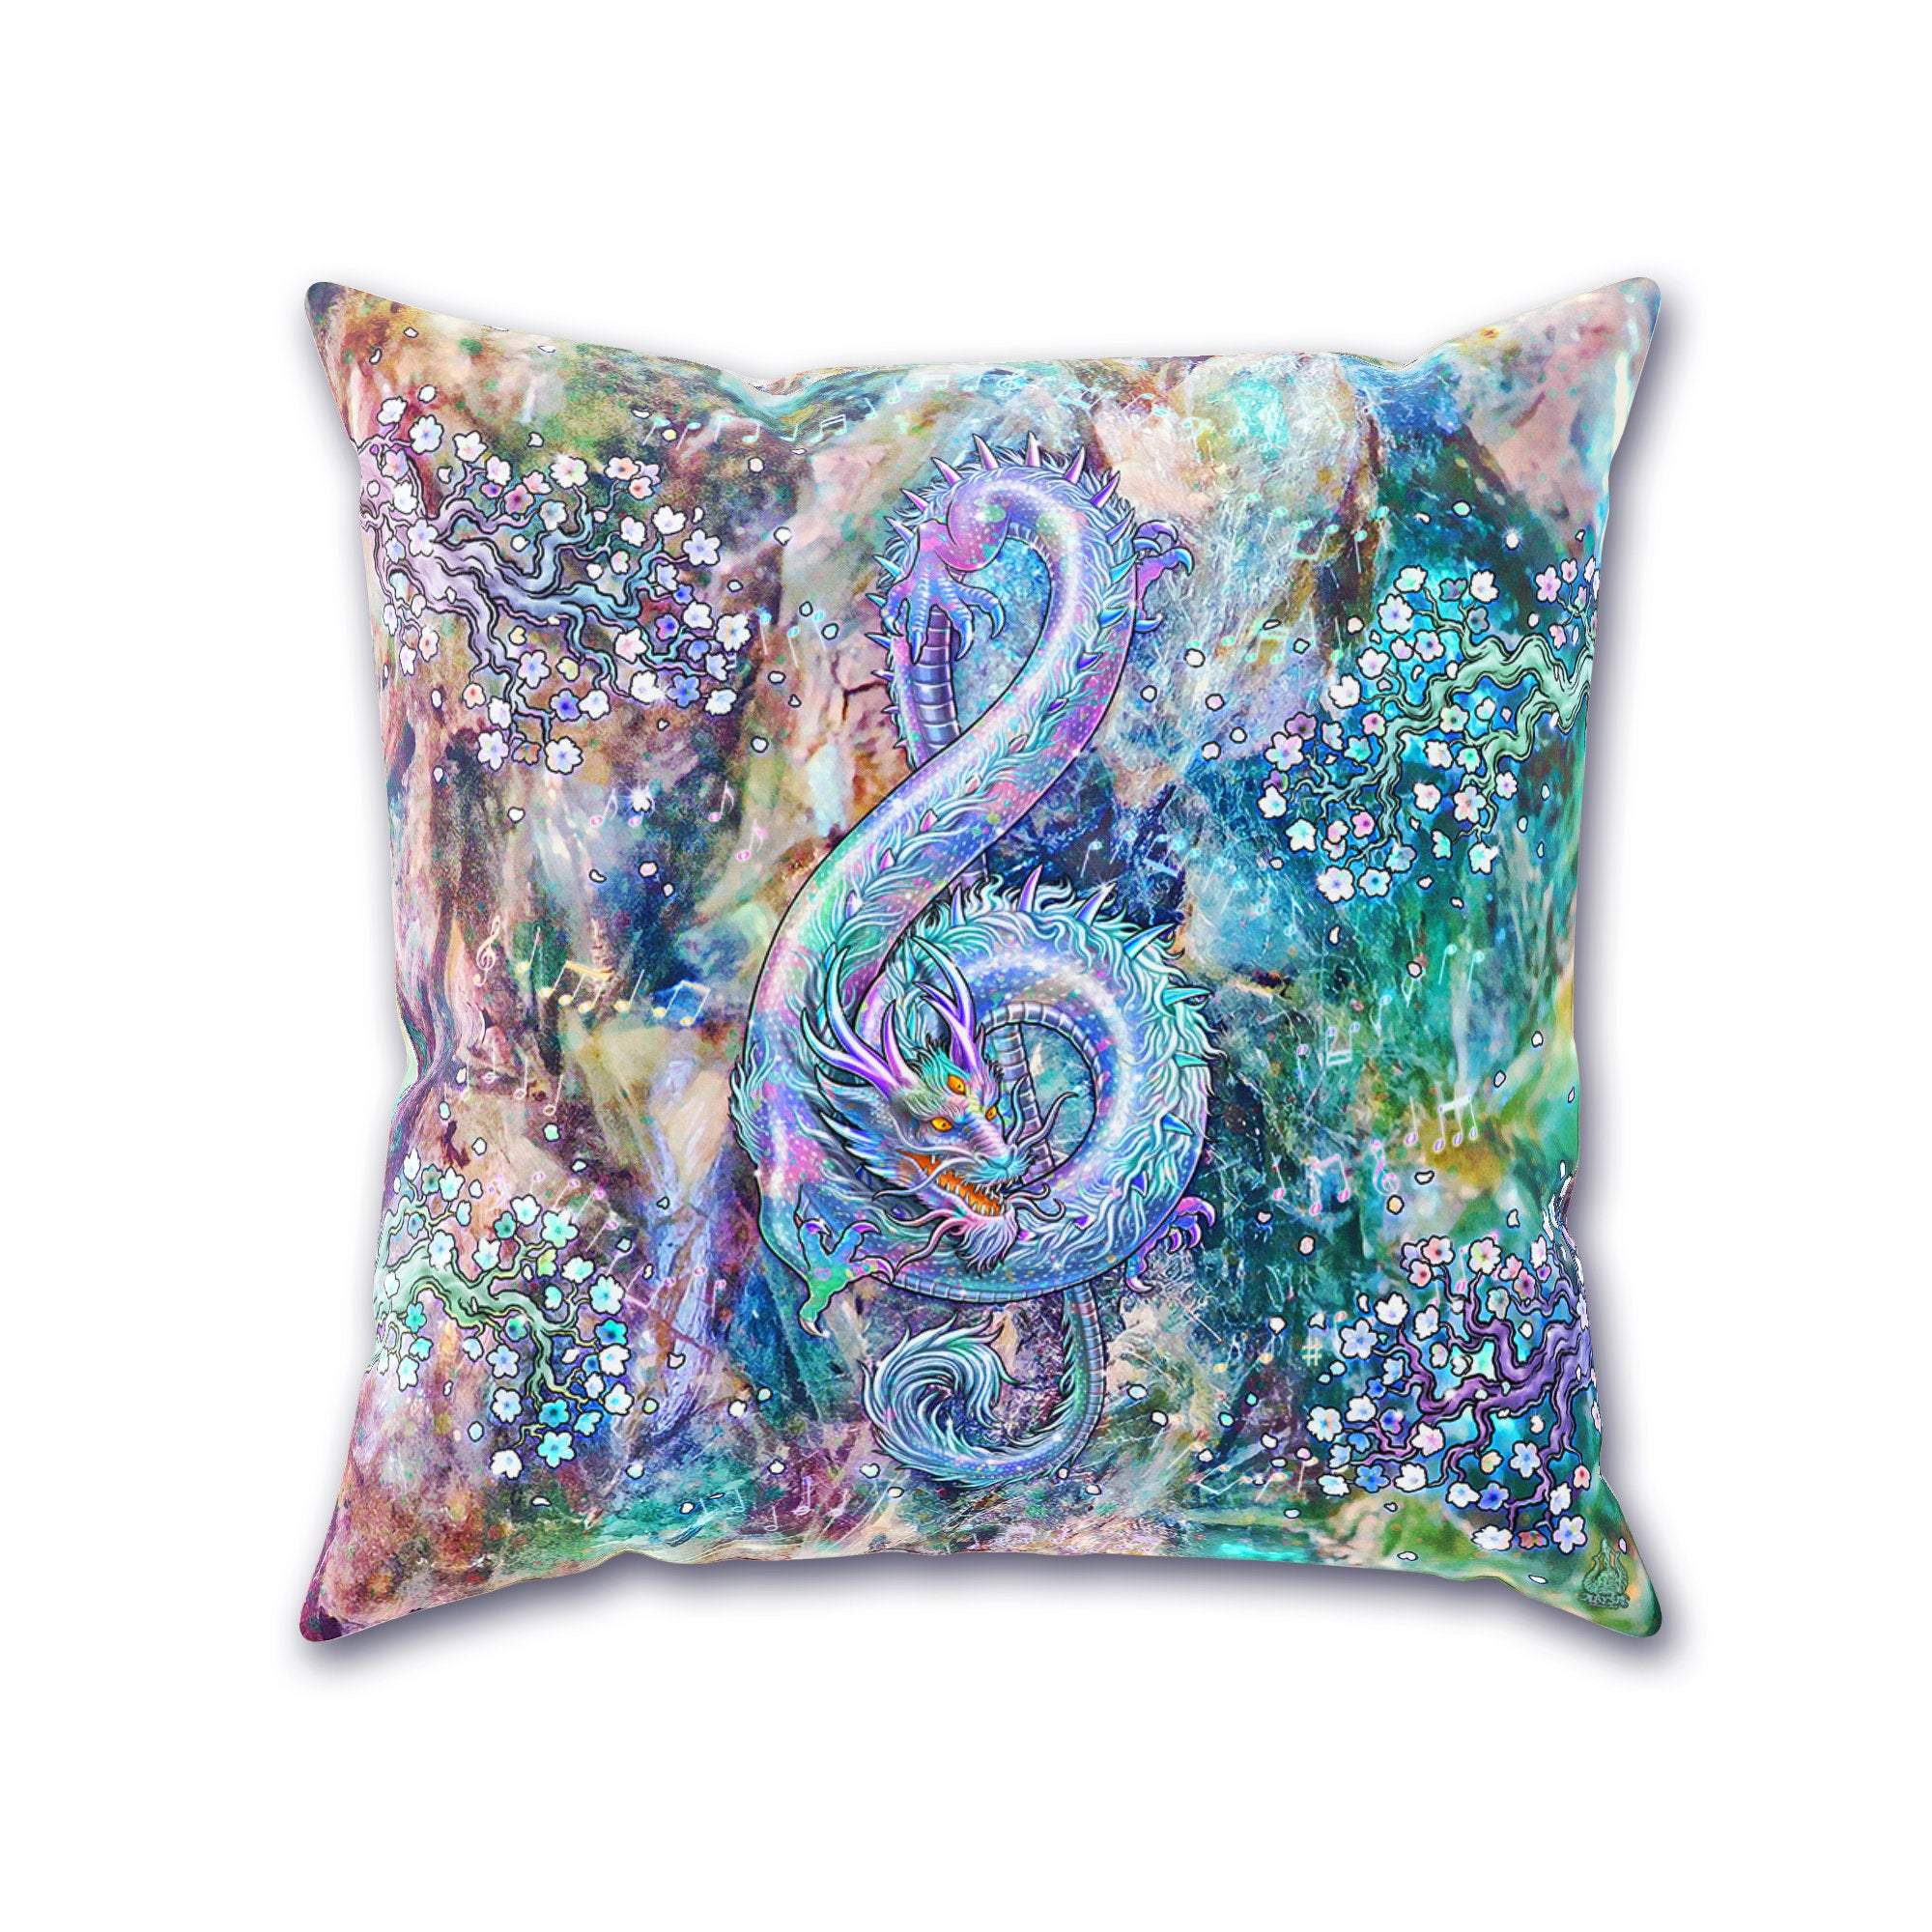 Indie Throw Pillow, Decorative Accent Cushion, Eclectic Design, Music Room Decor - Treble Clef Dragon, Gemstone, Opal - Abysm Internal